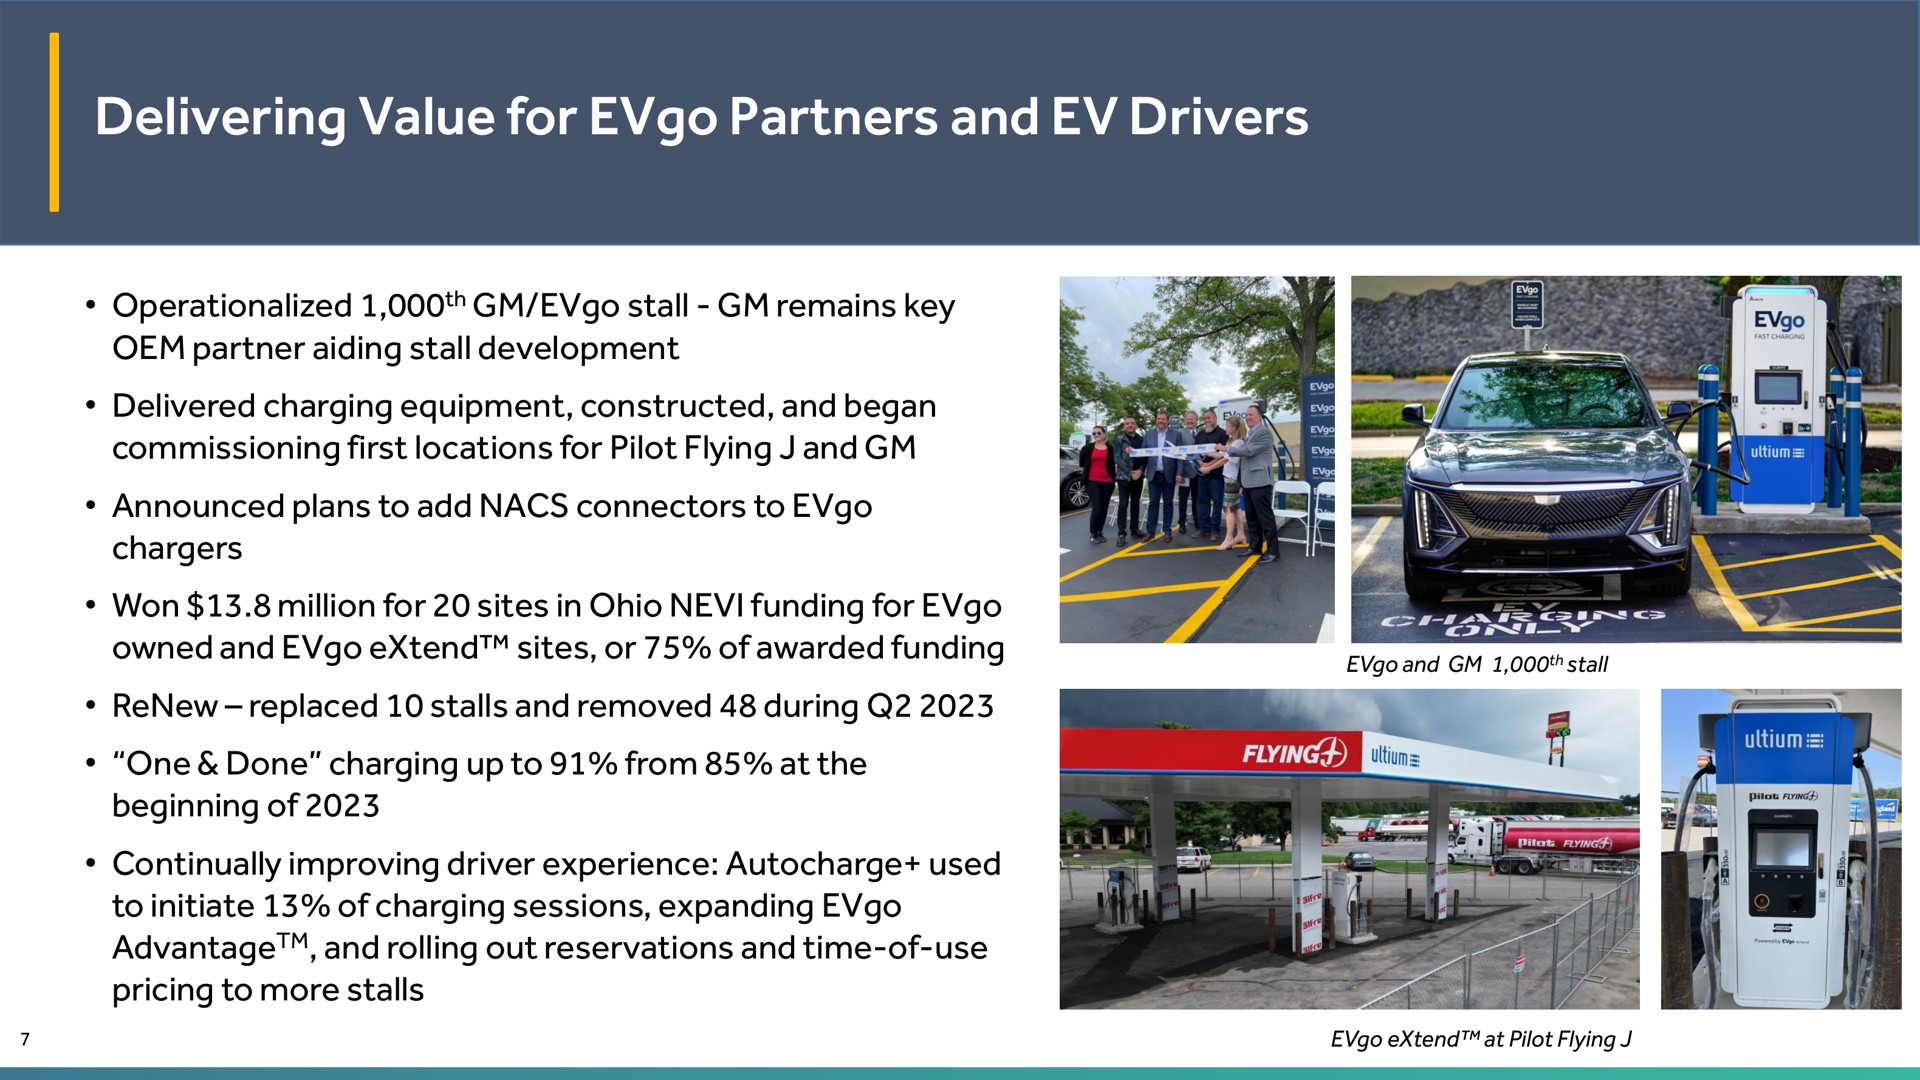 delivering value for partners and drivers | EVgo